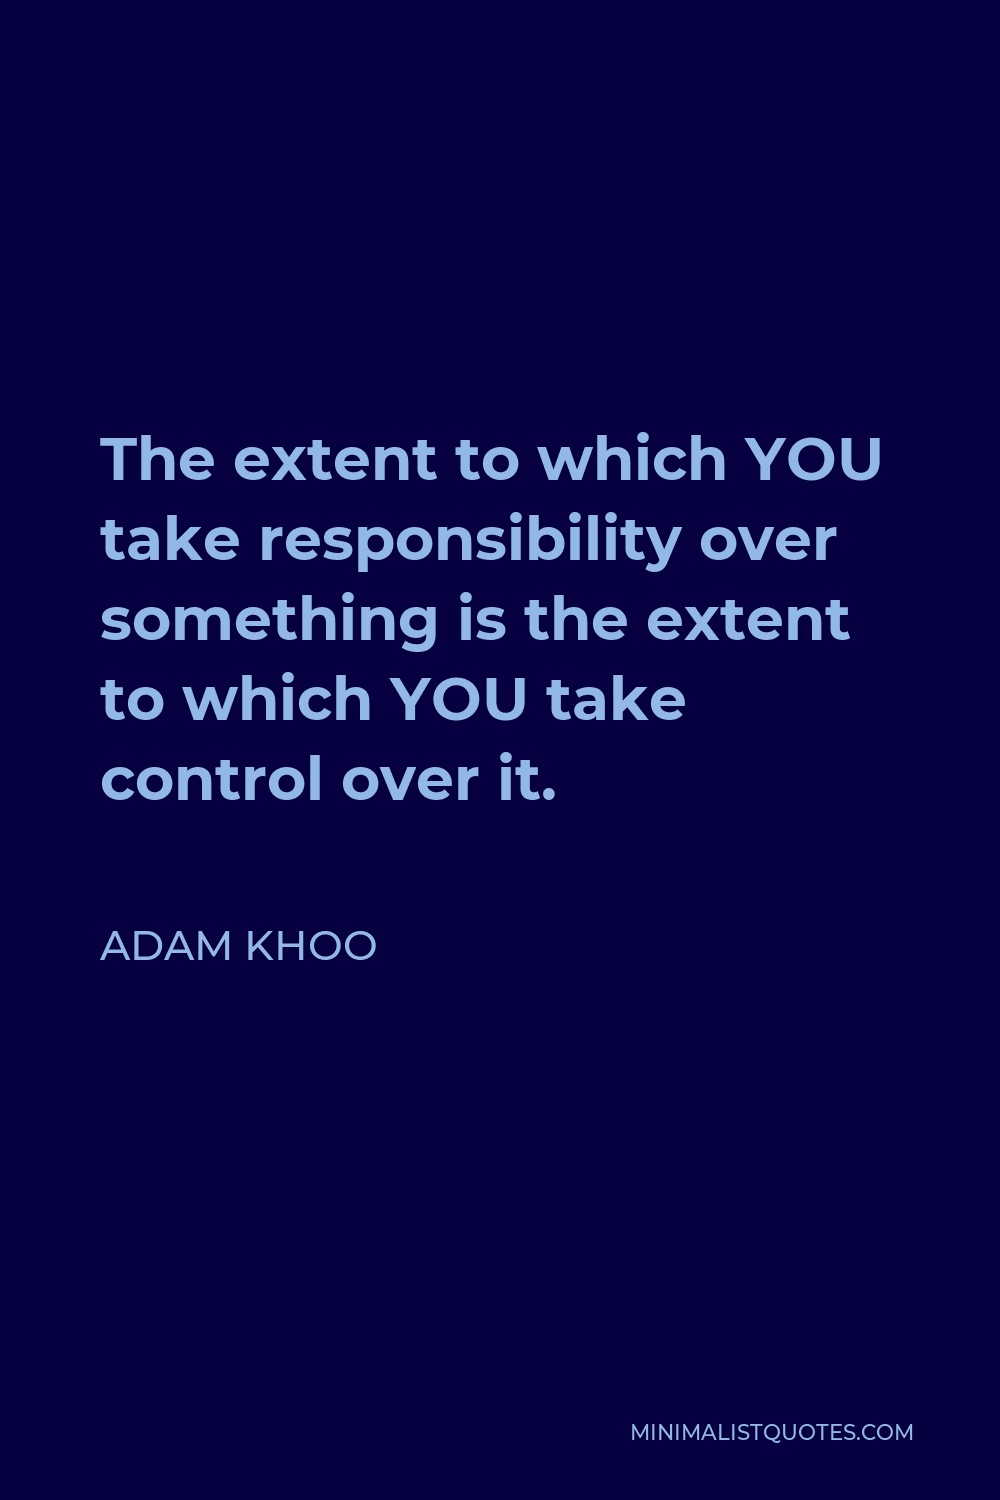 Adam Khoo Quote - The extent to which YOU take responsibility over something is the extent to which YOU take control over it.